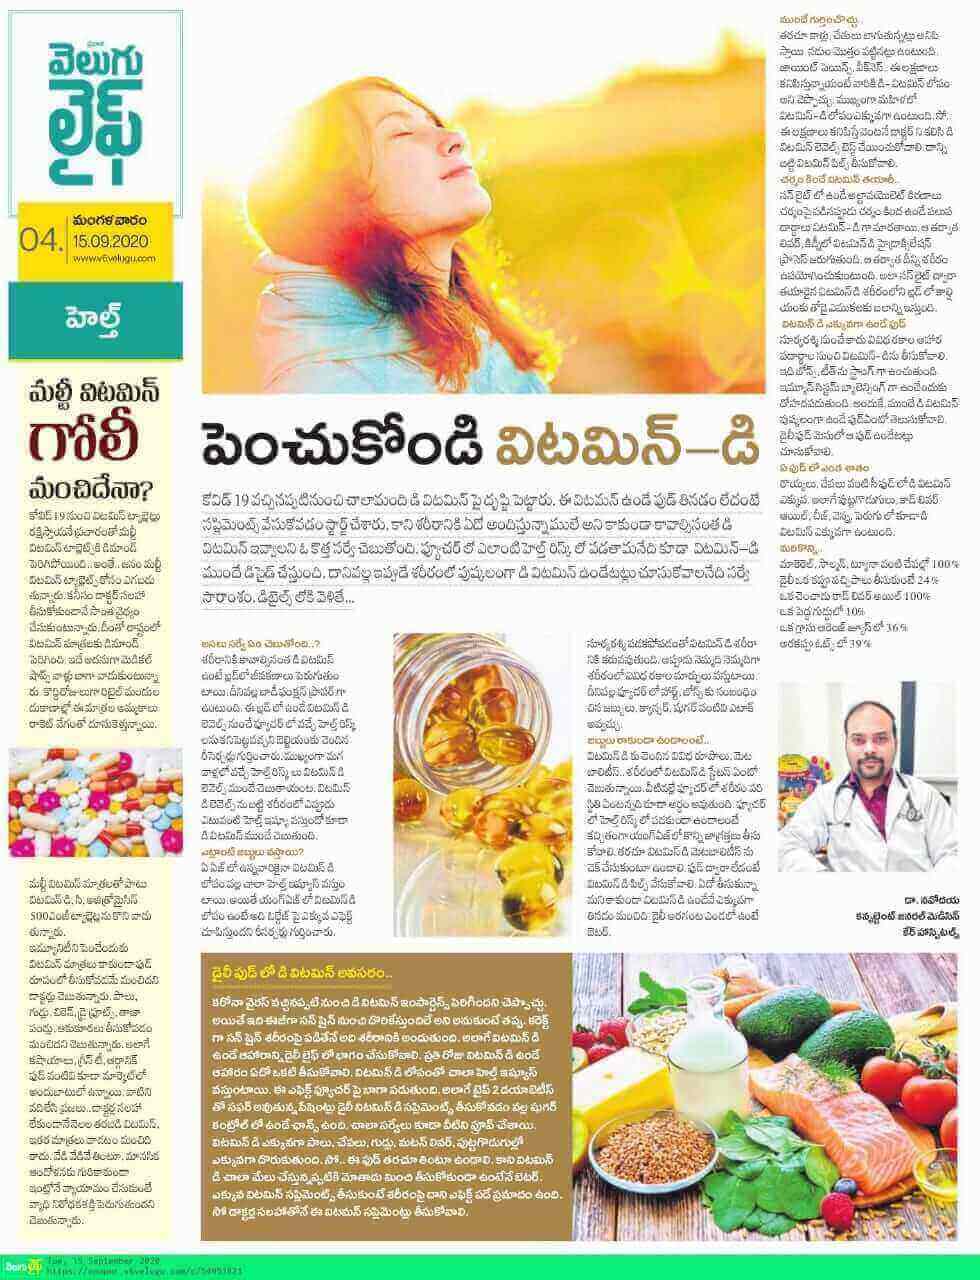 Article on Vitamin D by Dr. G Navodaya Consultant General Medicine